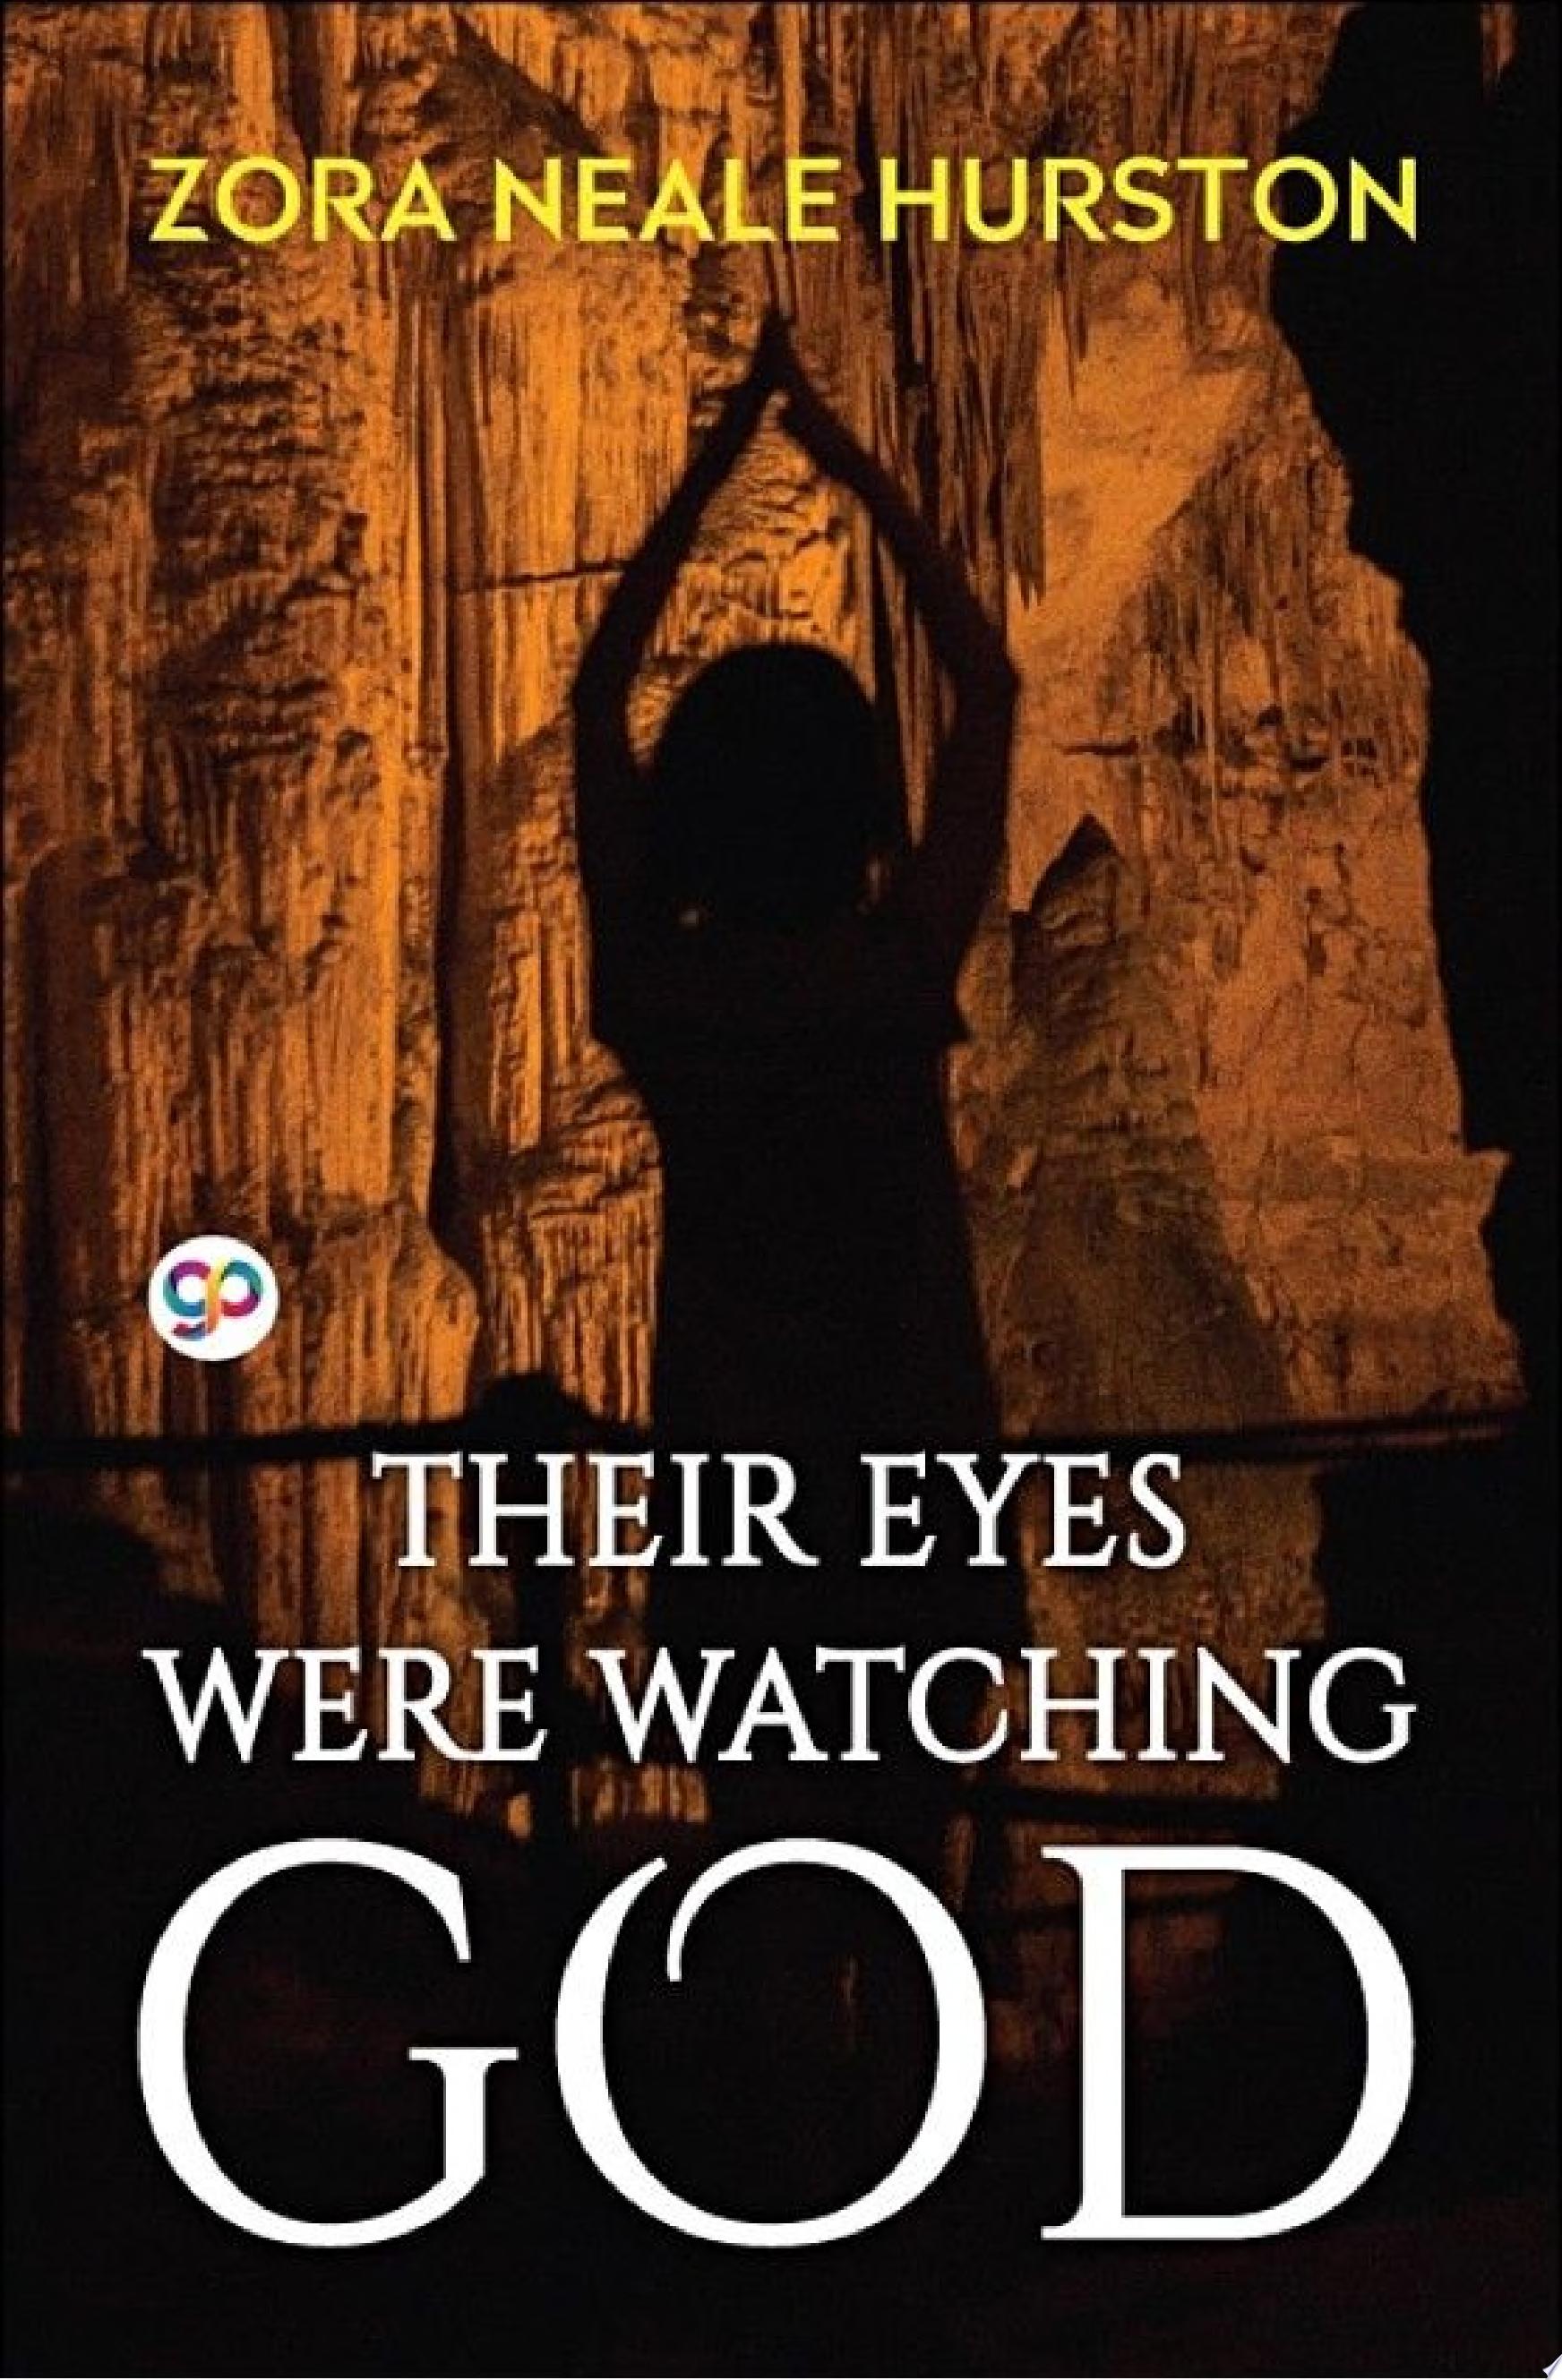 Image for "Their Eyes Were Watching God"